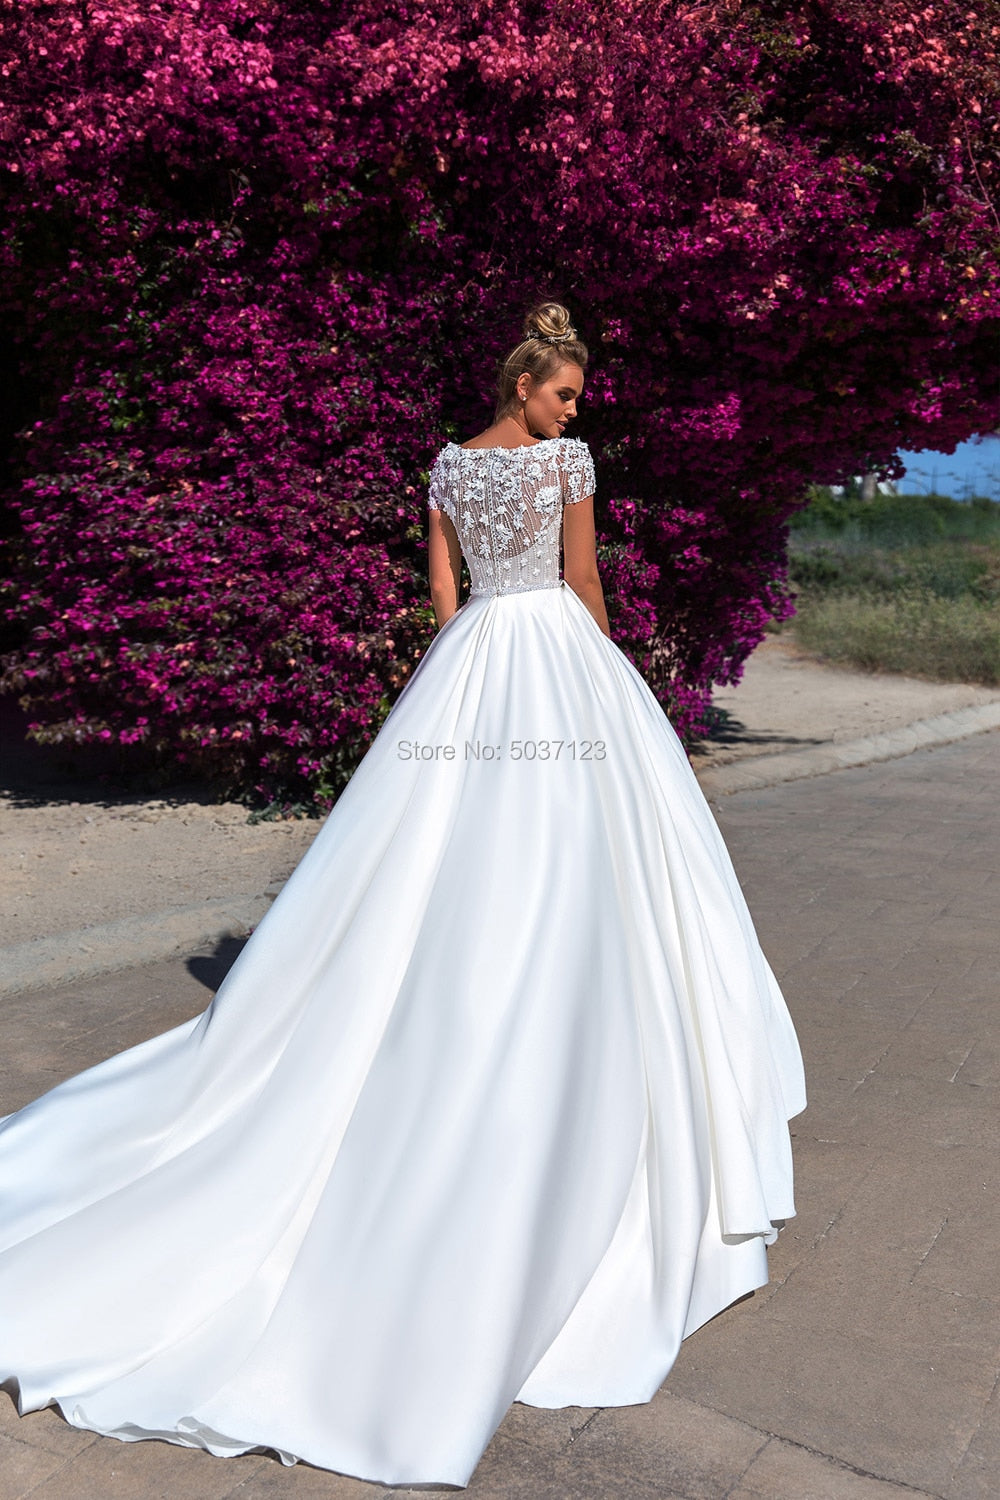 Structured Wedding Dresses & Gowns | Structured Bridal Dresses